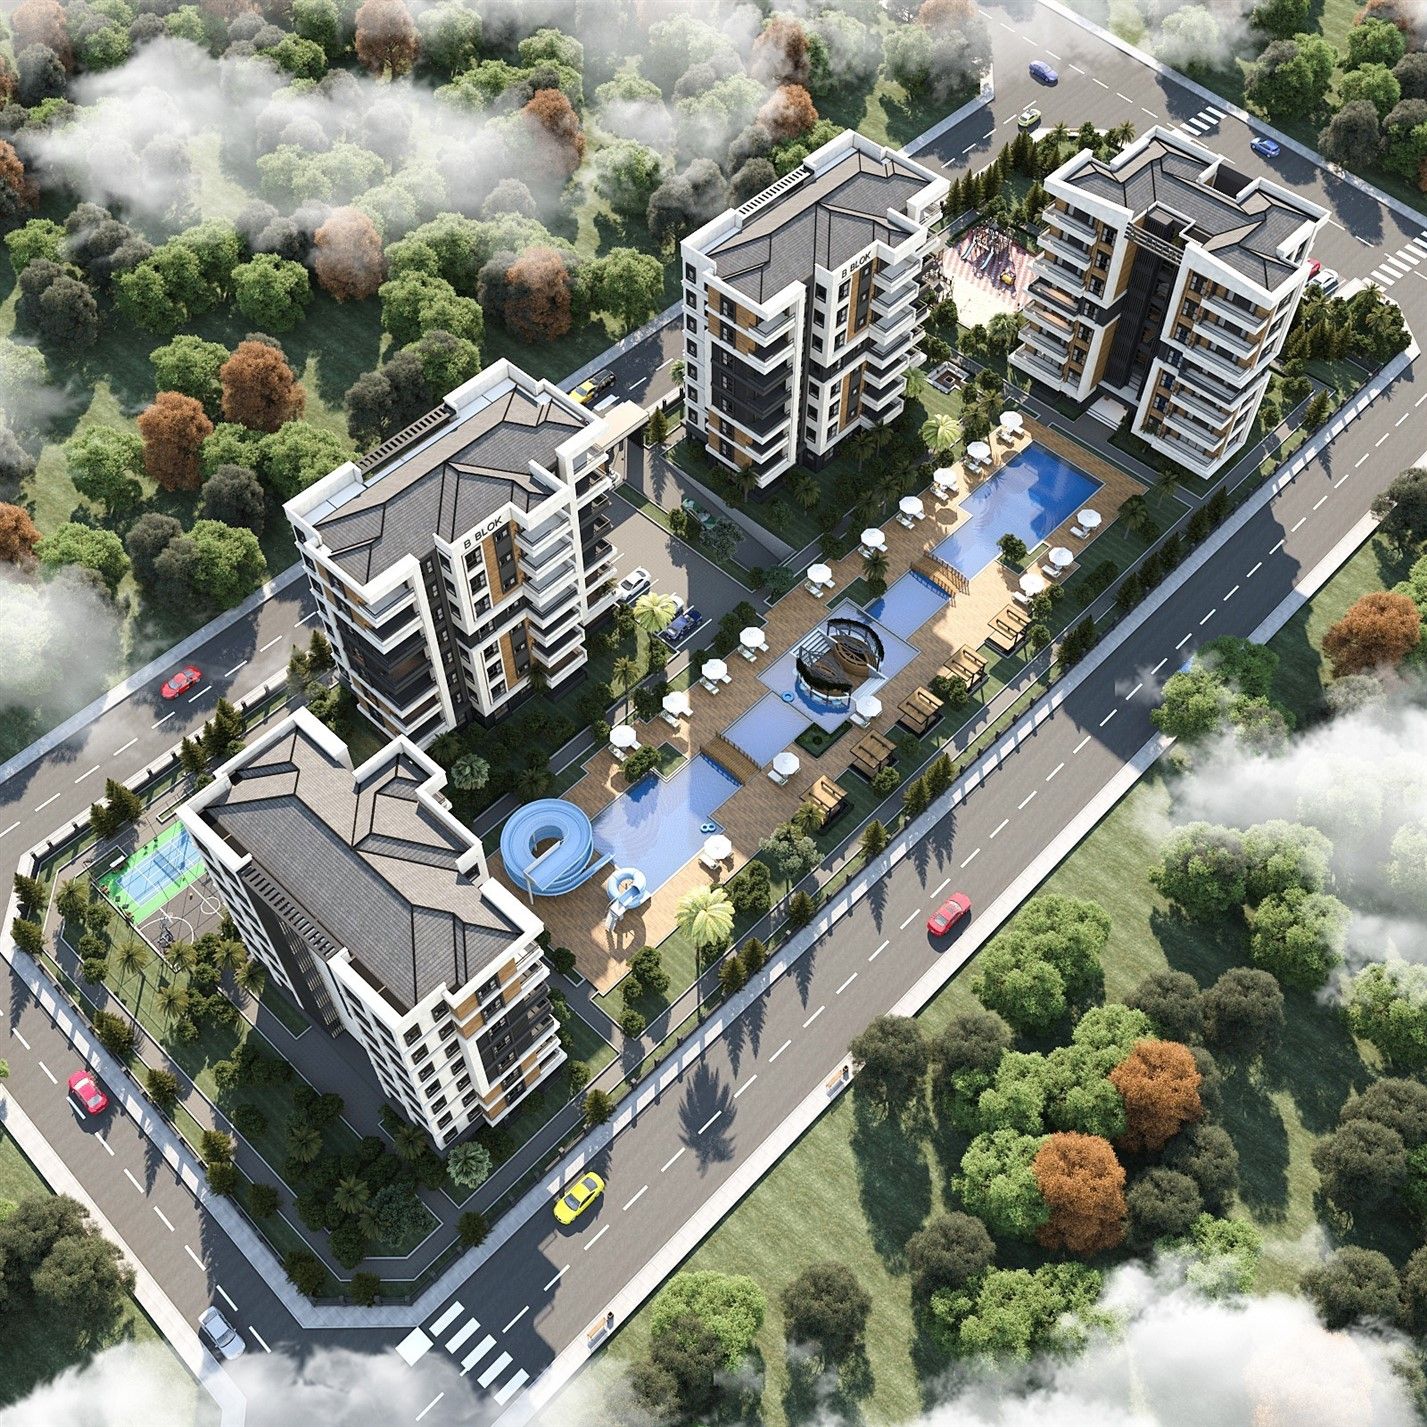 Elite residential complex under construction in a rapidly developing district